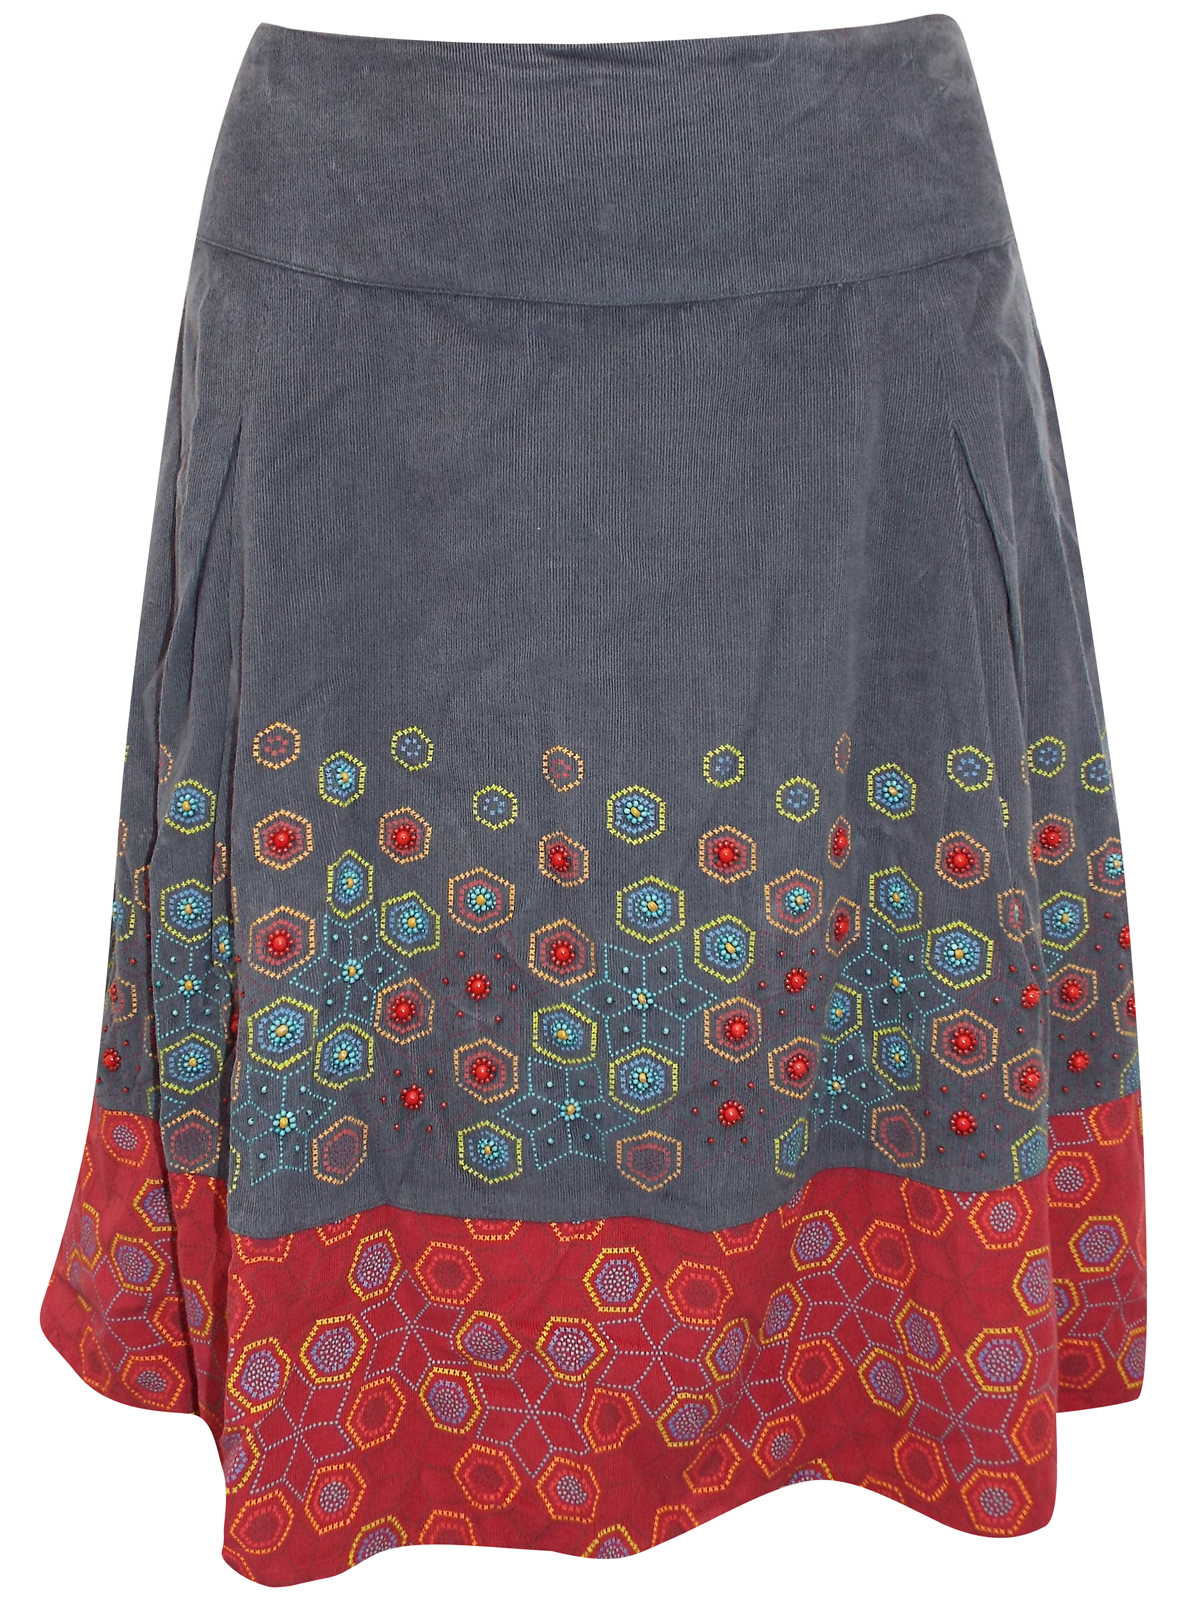 M0nsoon ASSORTED Ladies Skirts - Size 8 to 16